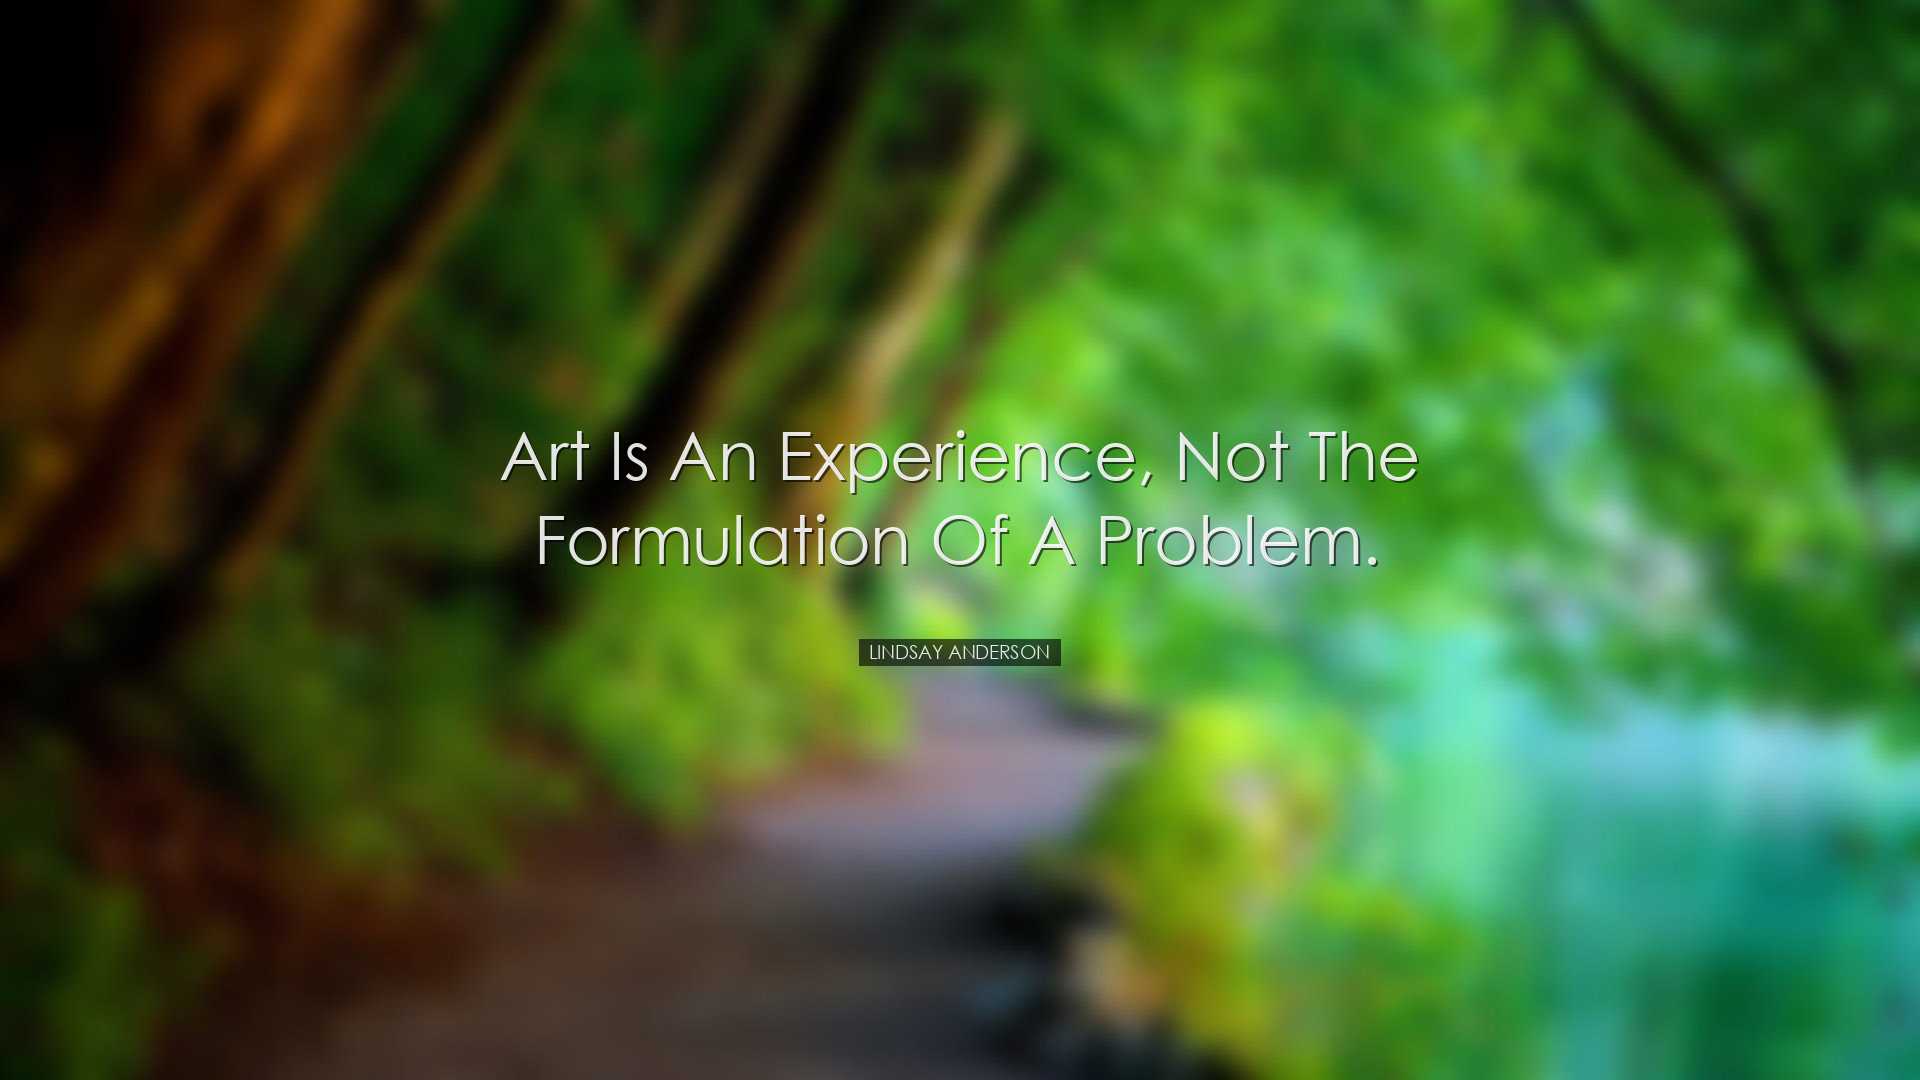 Art is an experience, not the formulation of a problem. - Lindsay